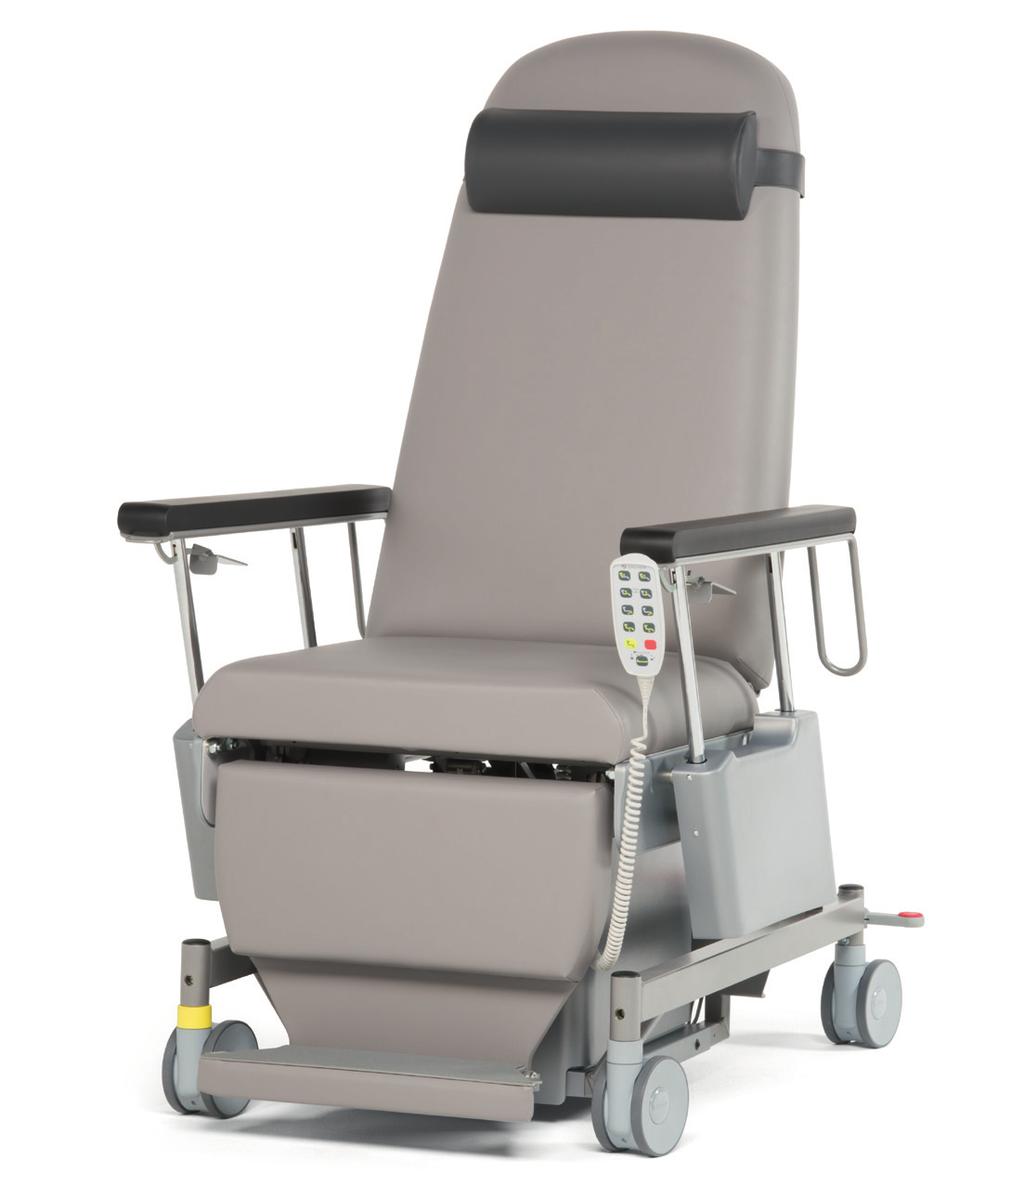 Product safety GREINER treatment couches are independently tested and certified Hygiene